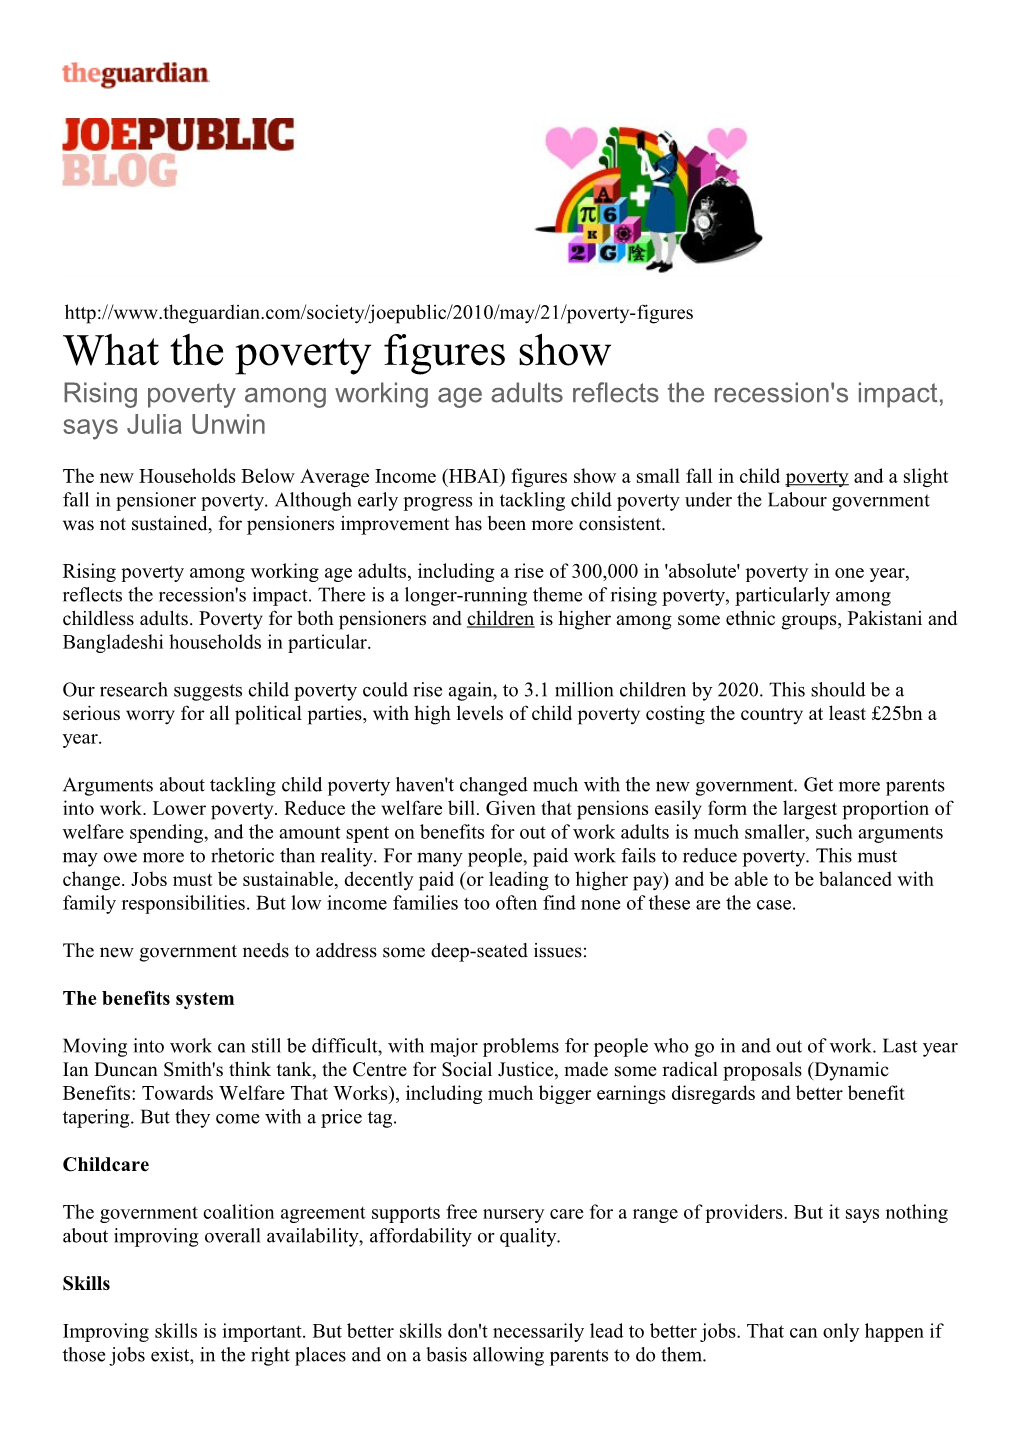 What the Poverty Figures Show